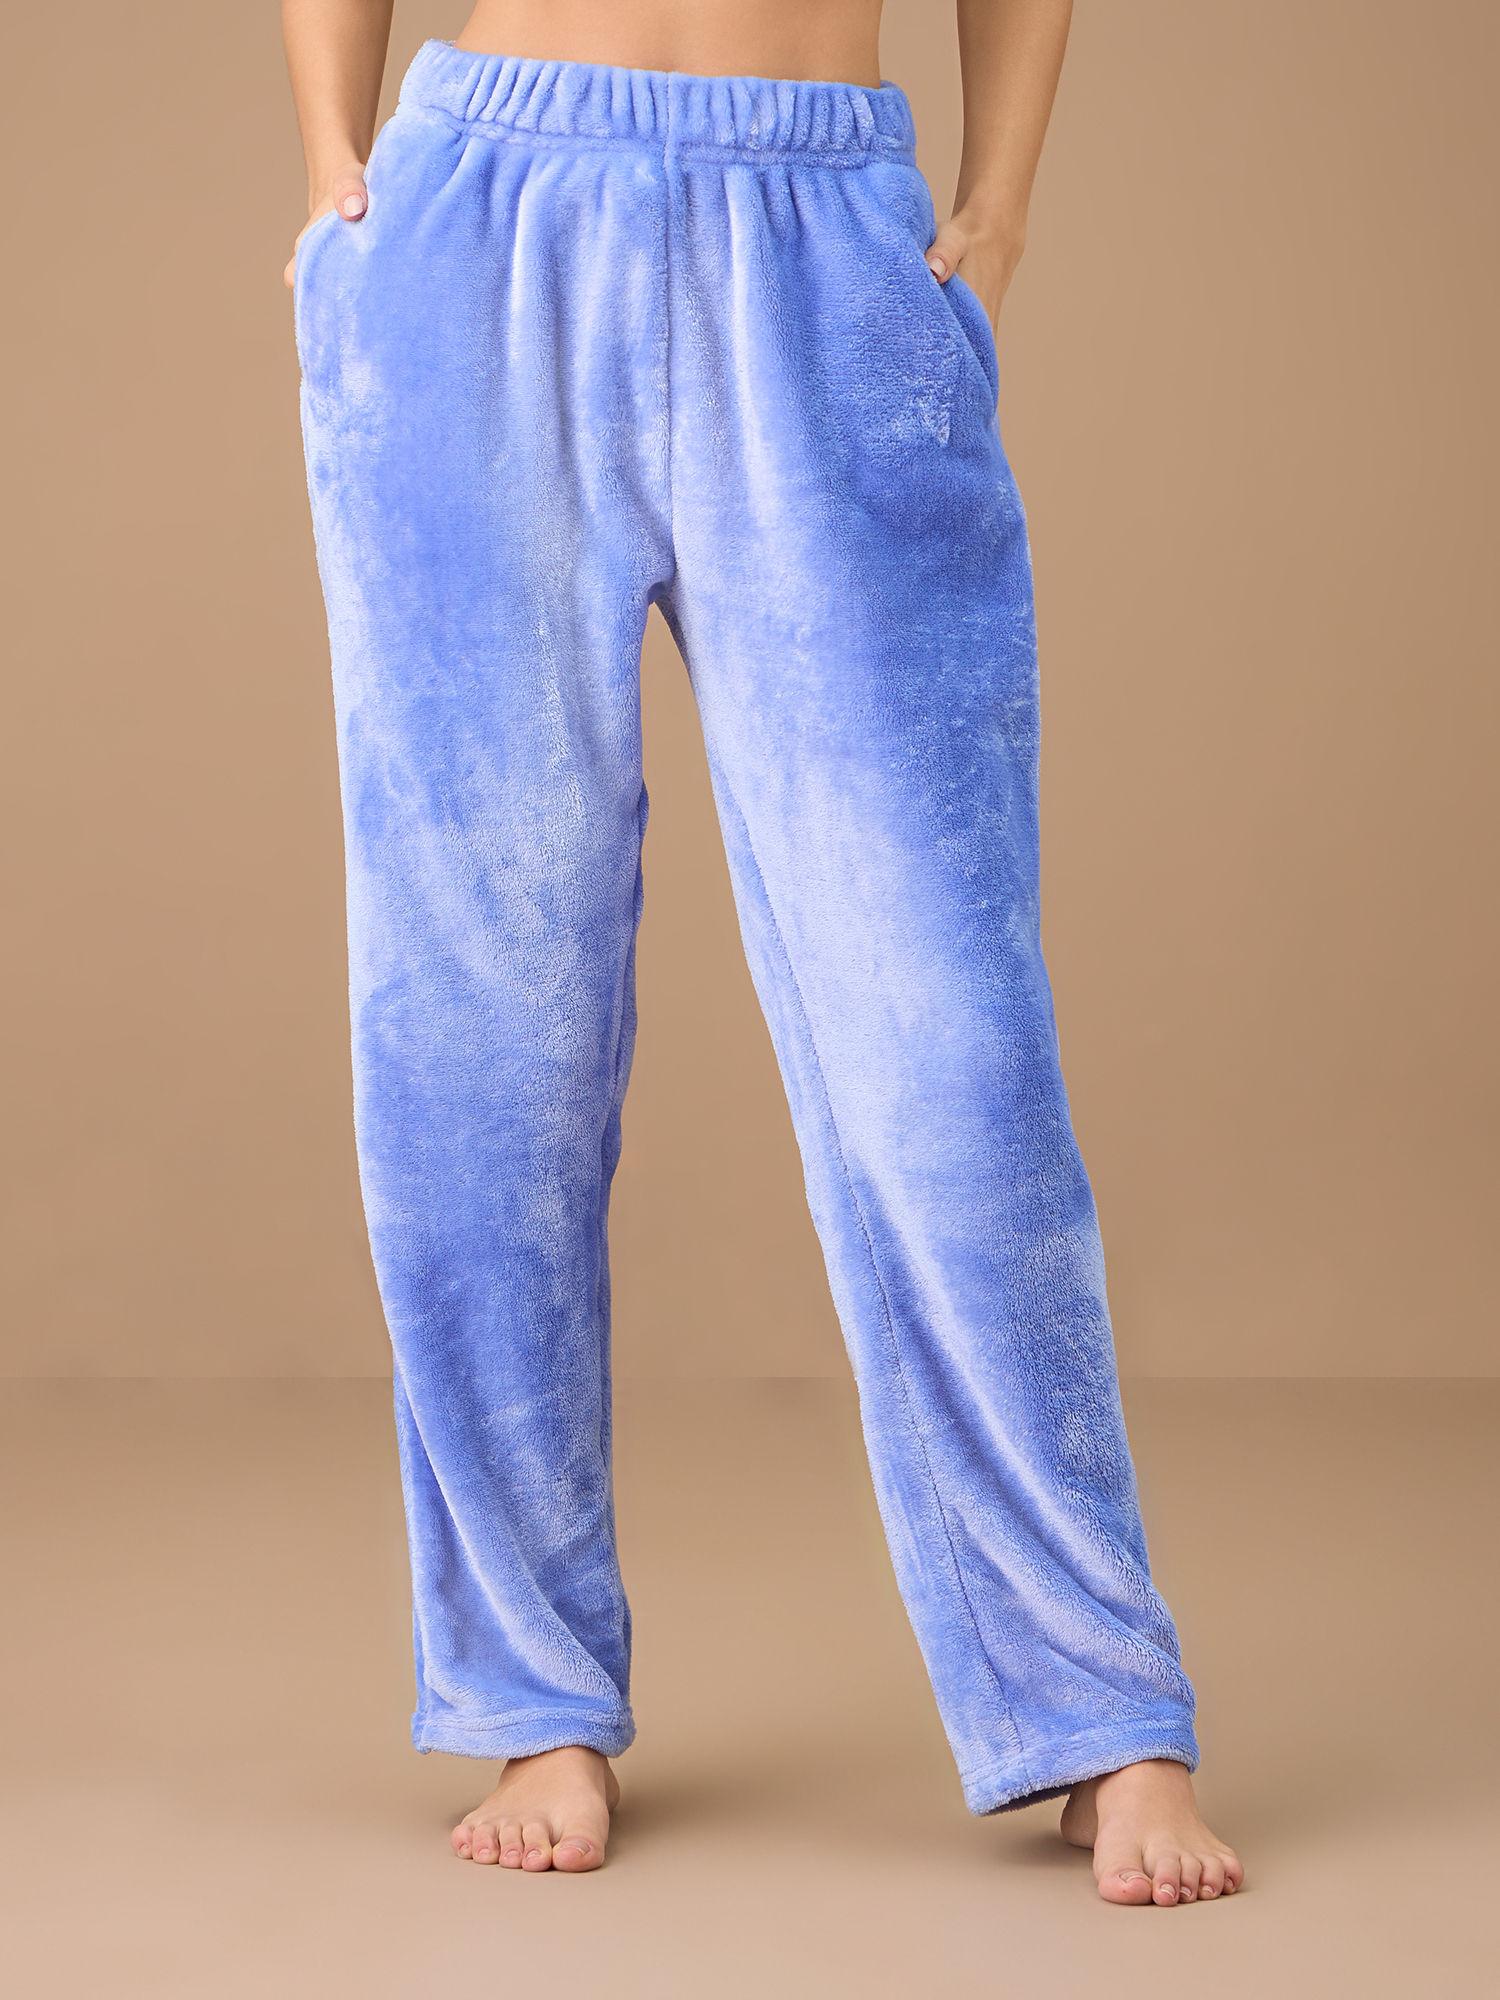 luxe fur pants - nys121 - blue